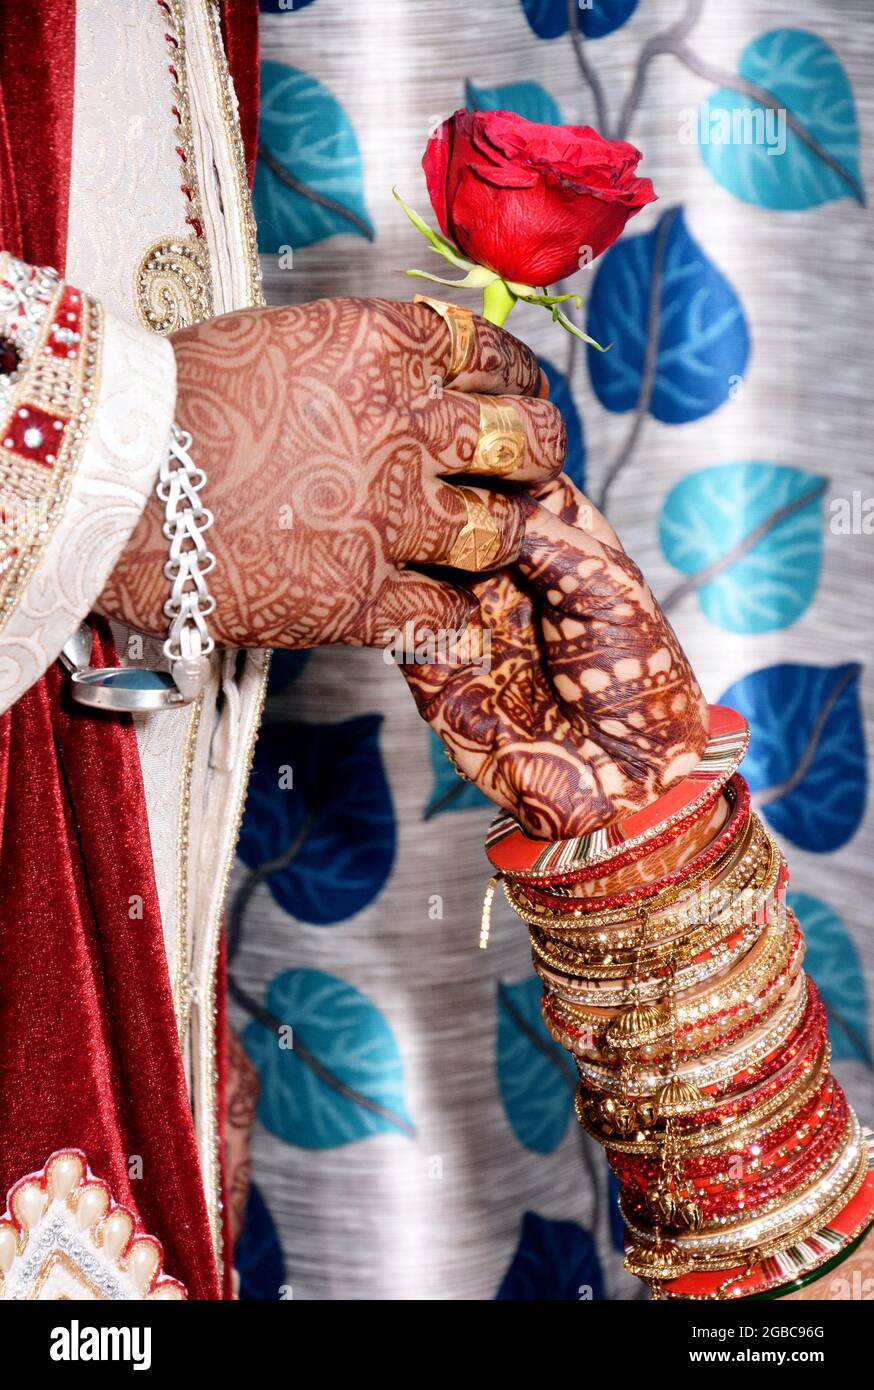 A closeup of an Indian groom giving a rose flower to a bride during wedding  ceremony Stock Photo - Alamy